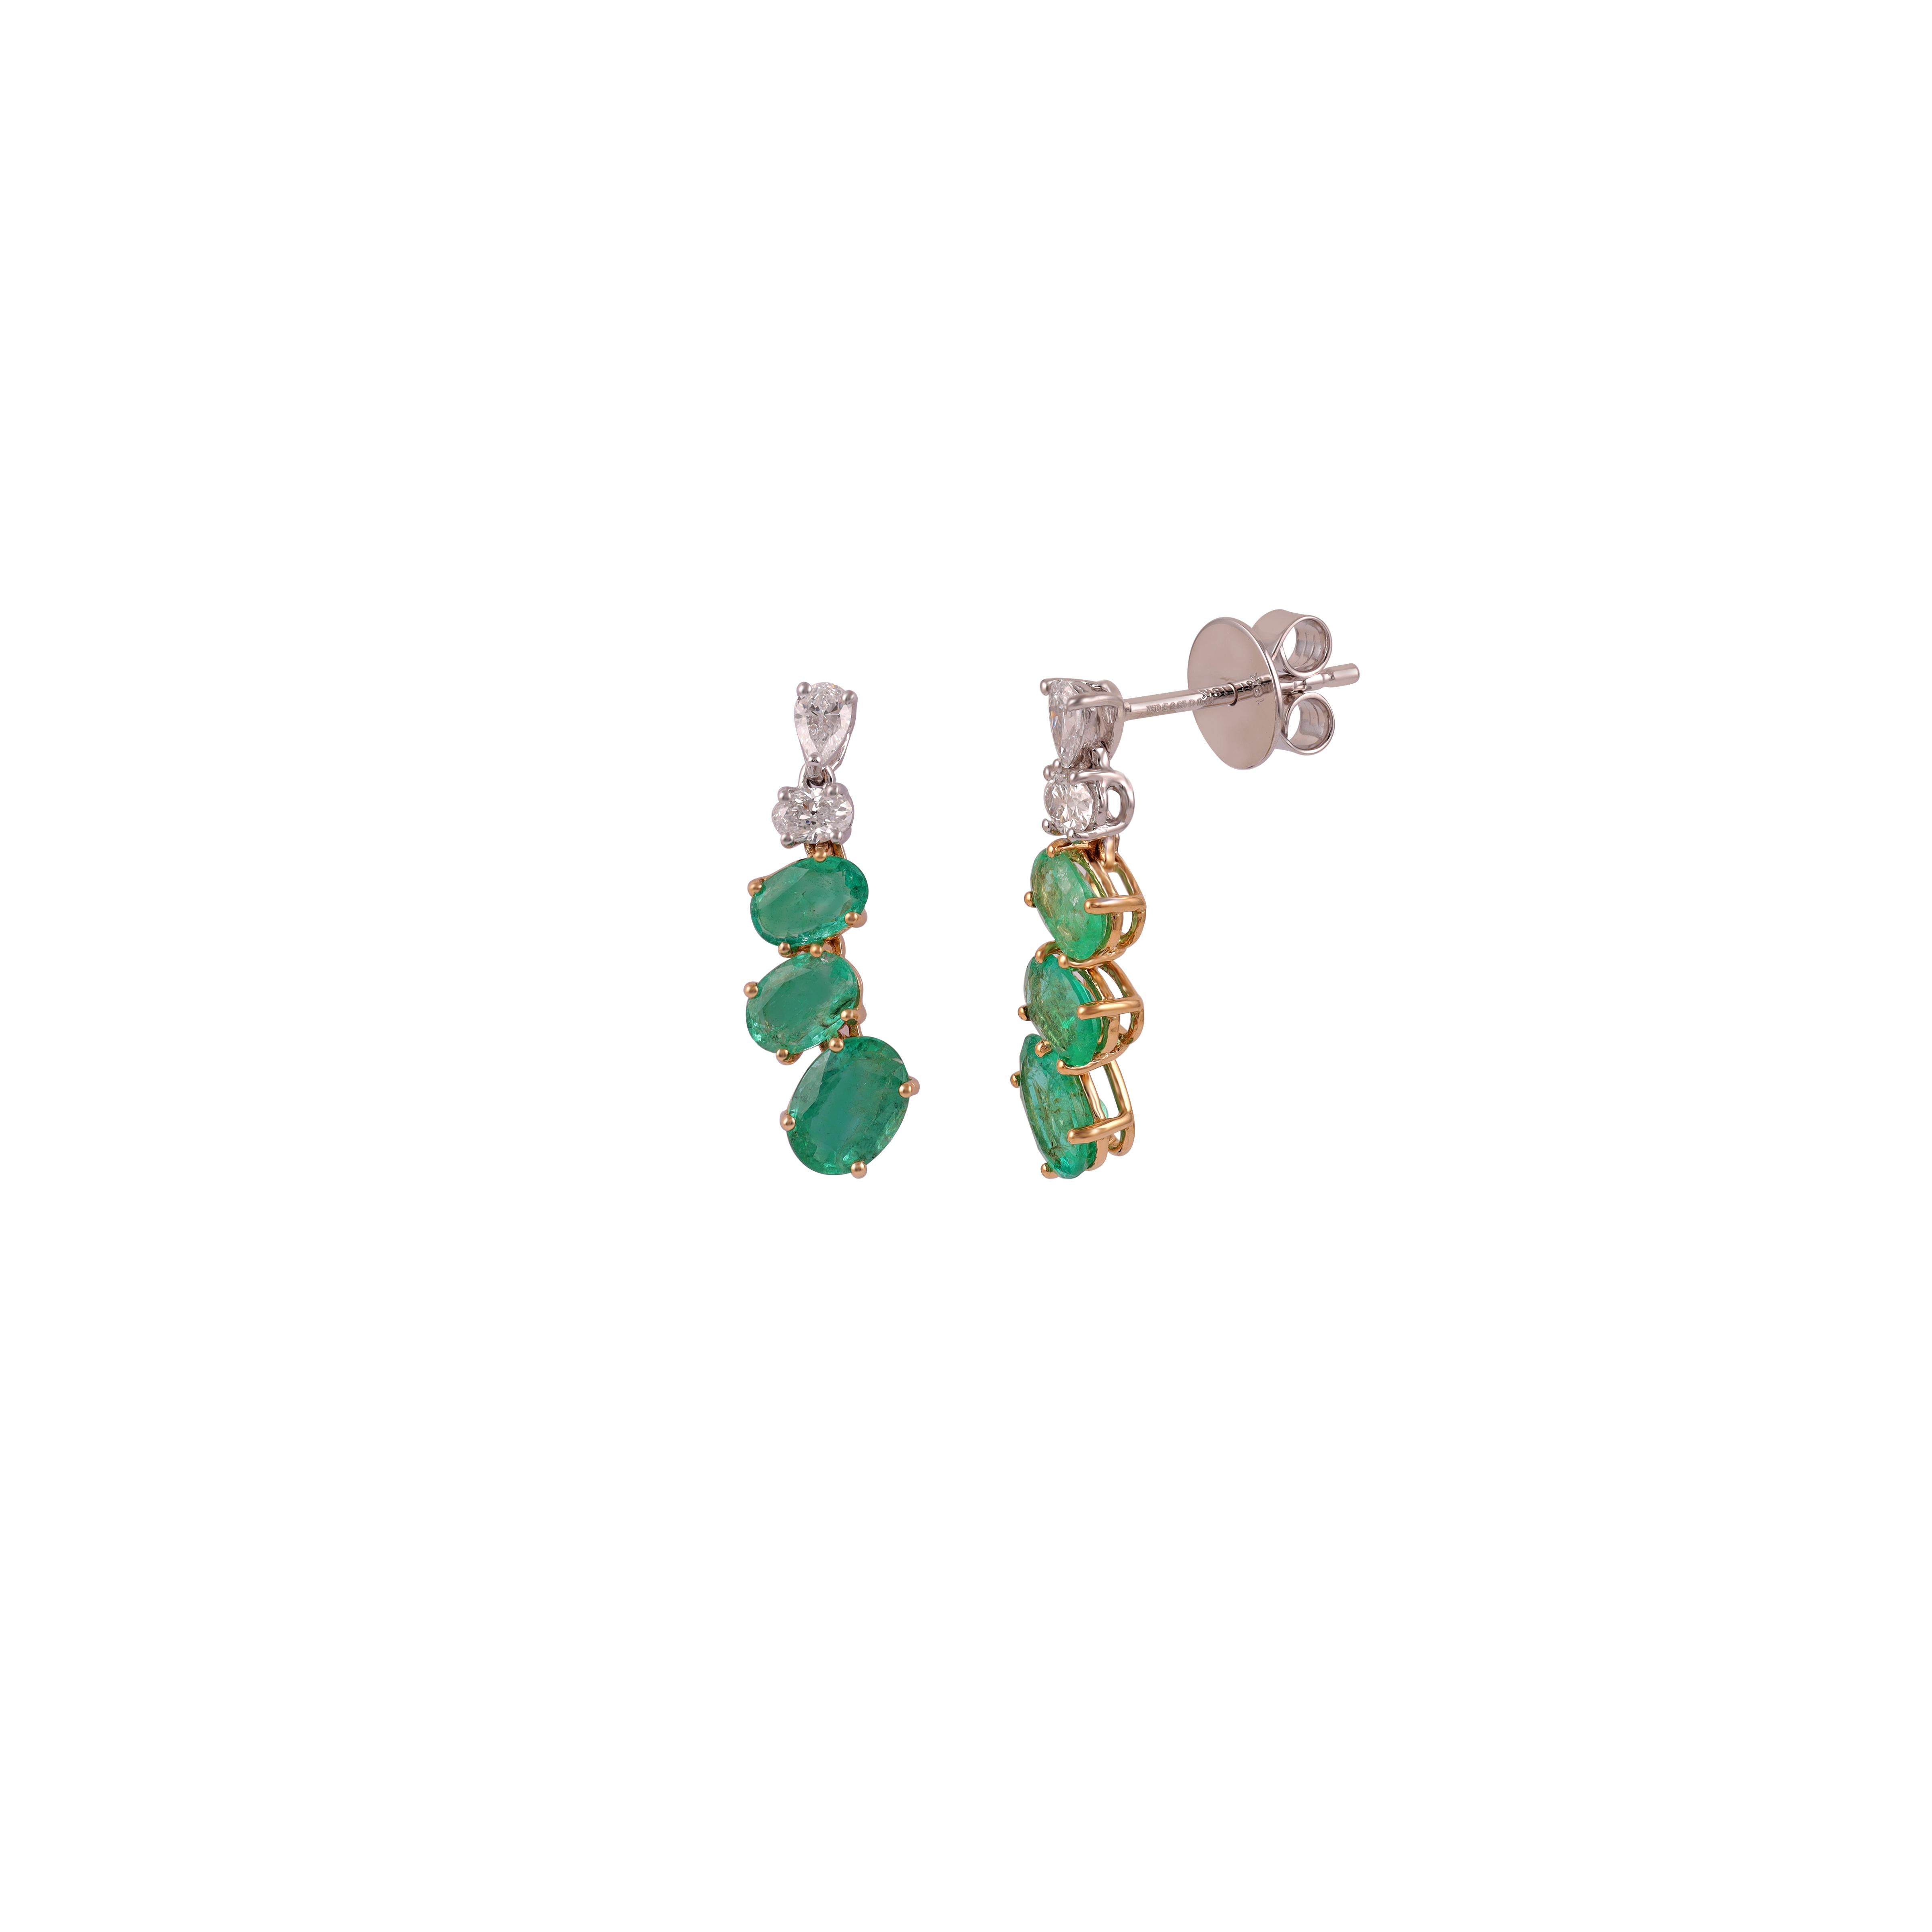 Contemporary 2.65 Carat Emerald & Diamond Earnings Set in 18k Gold For Sale